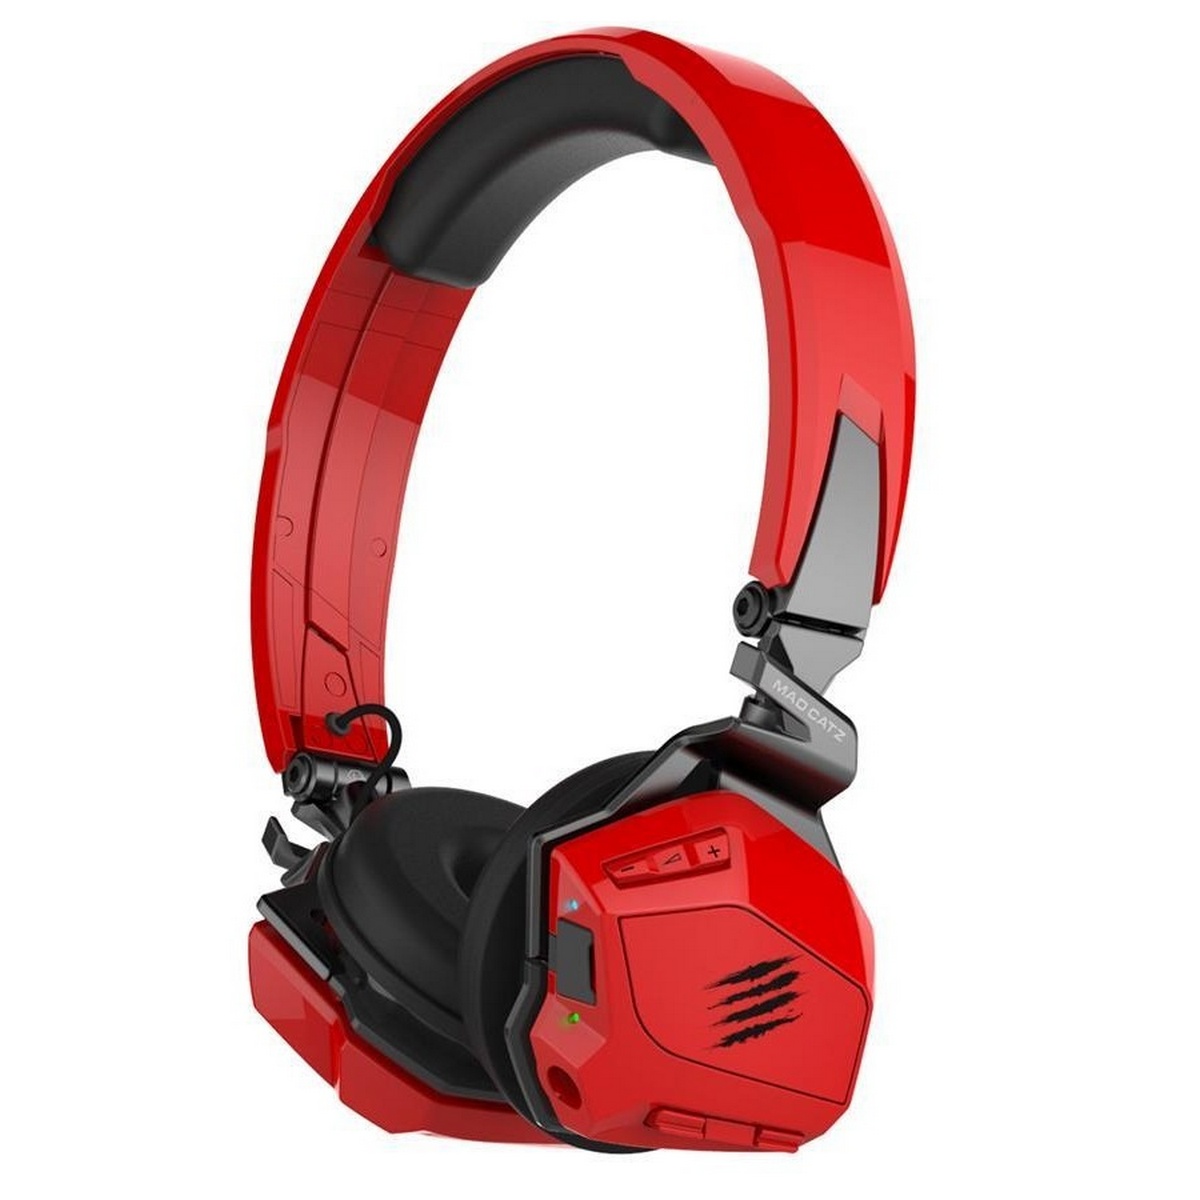 Mad Catz F.R.E.Q. M Wireless Mobile Gaming Headset - Red (PC, Mobile)